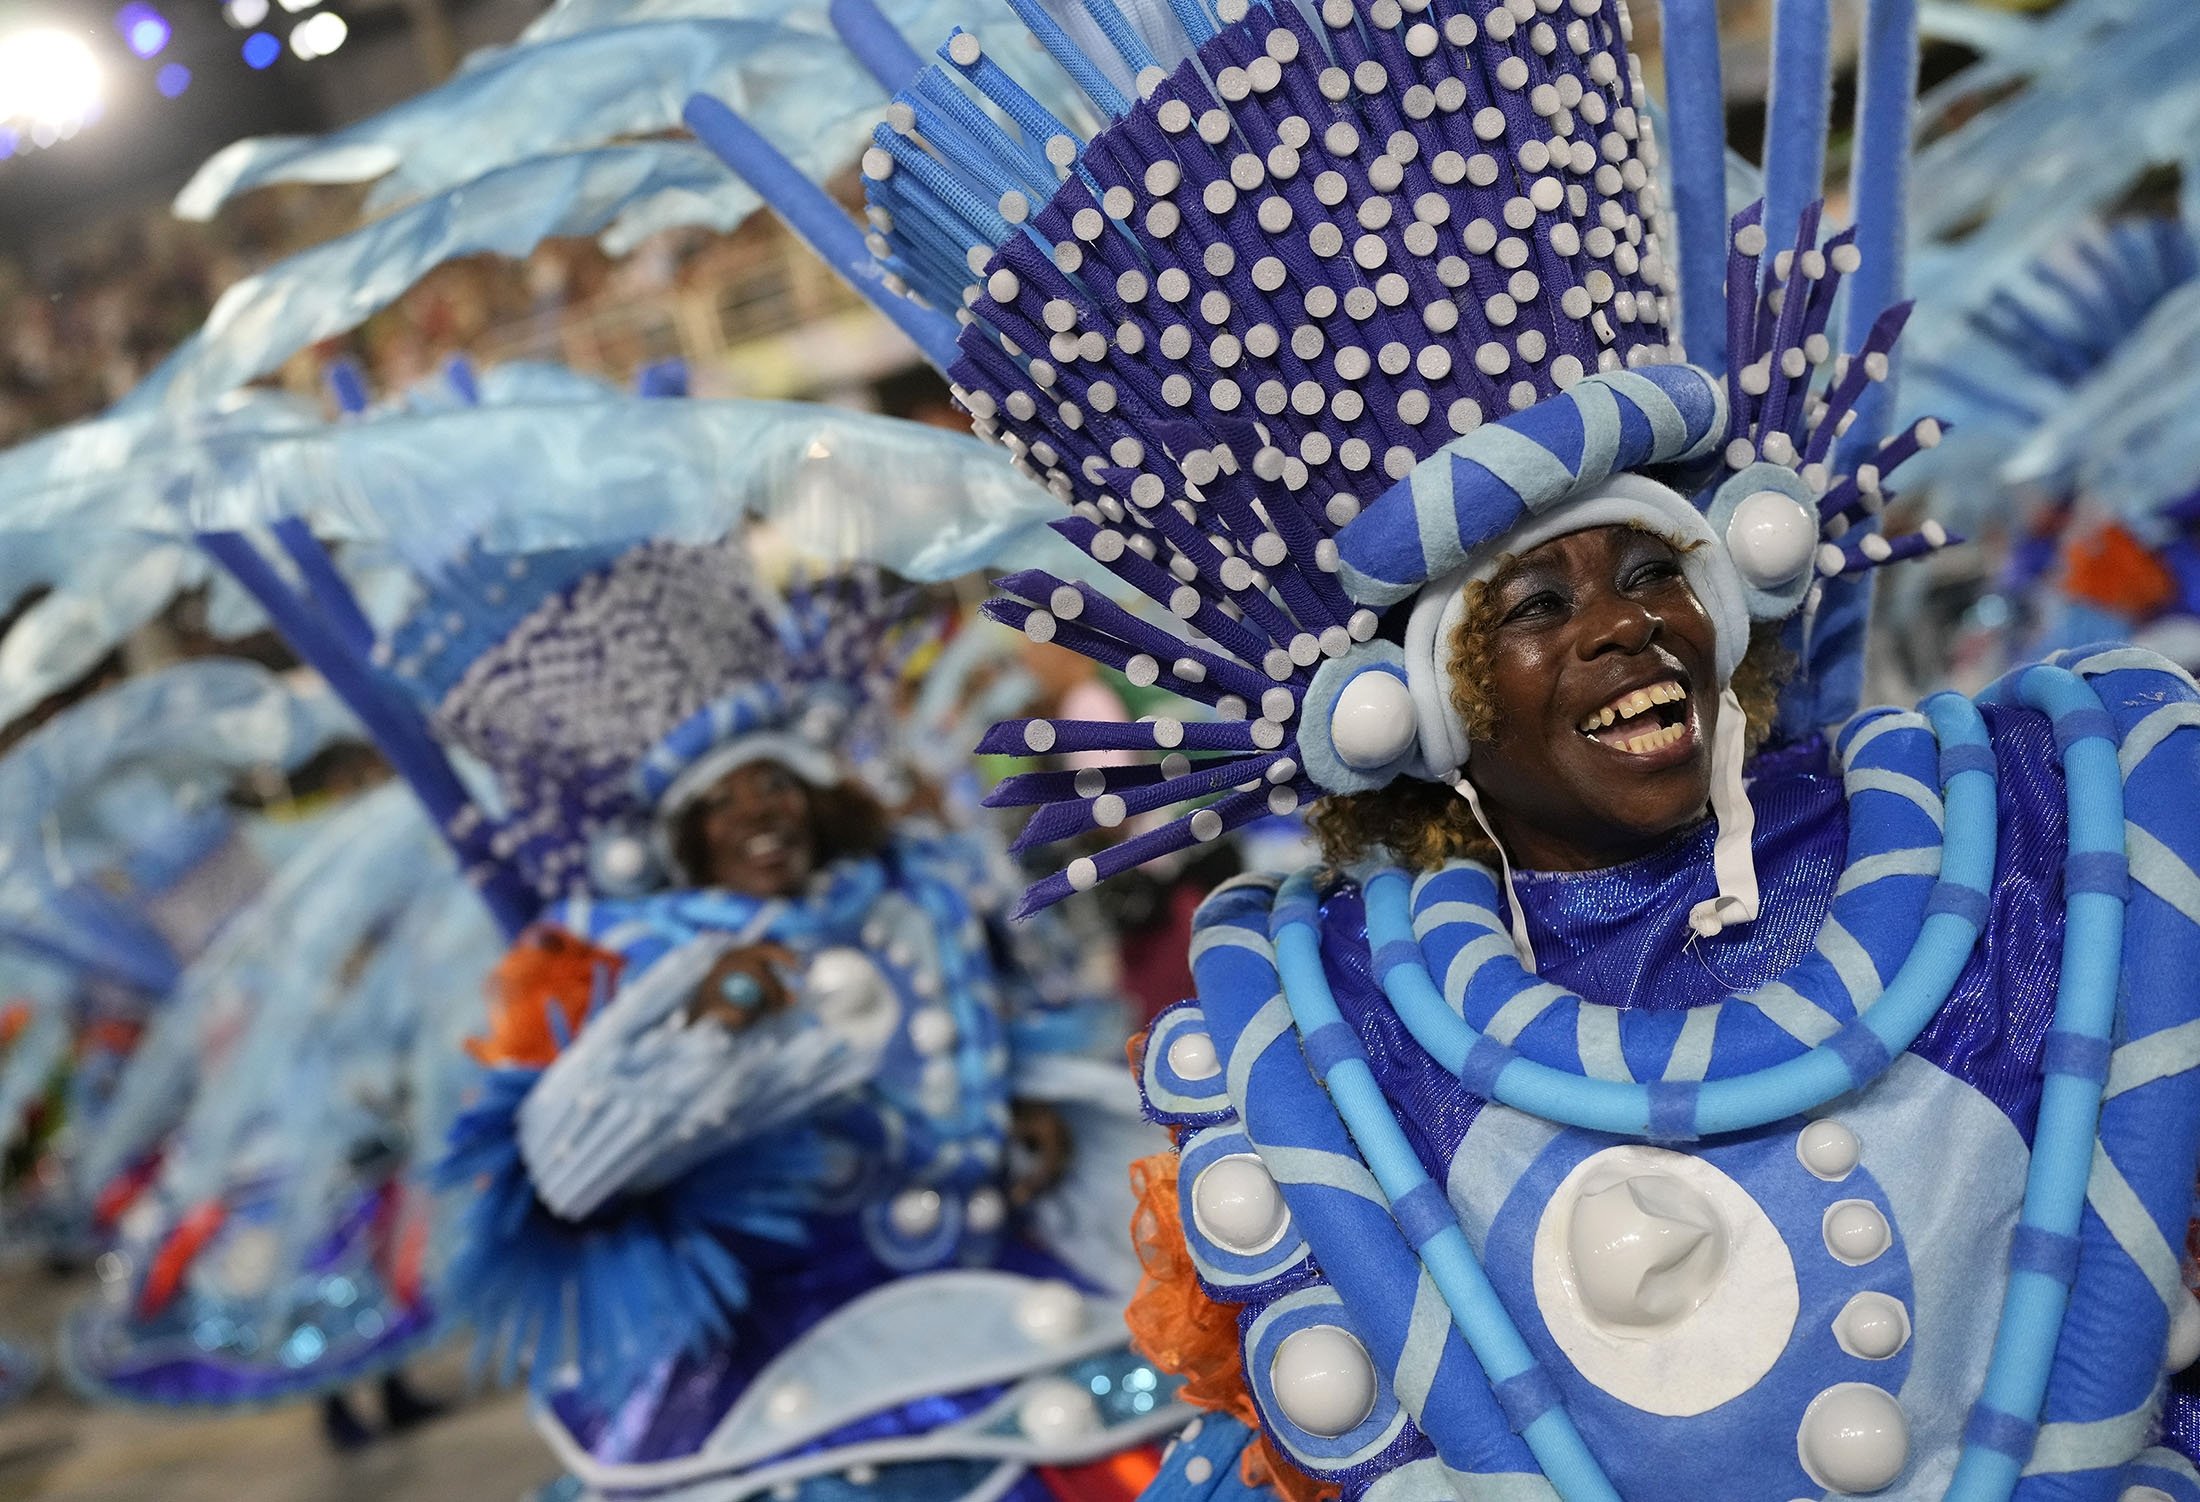 What is Carnival, Rio Carnival